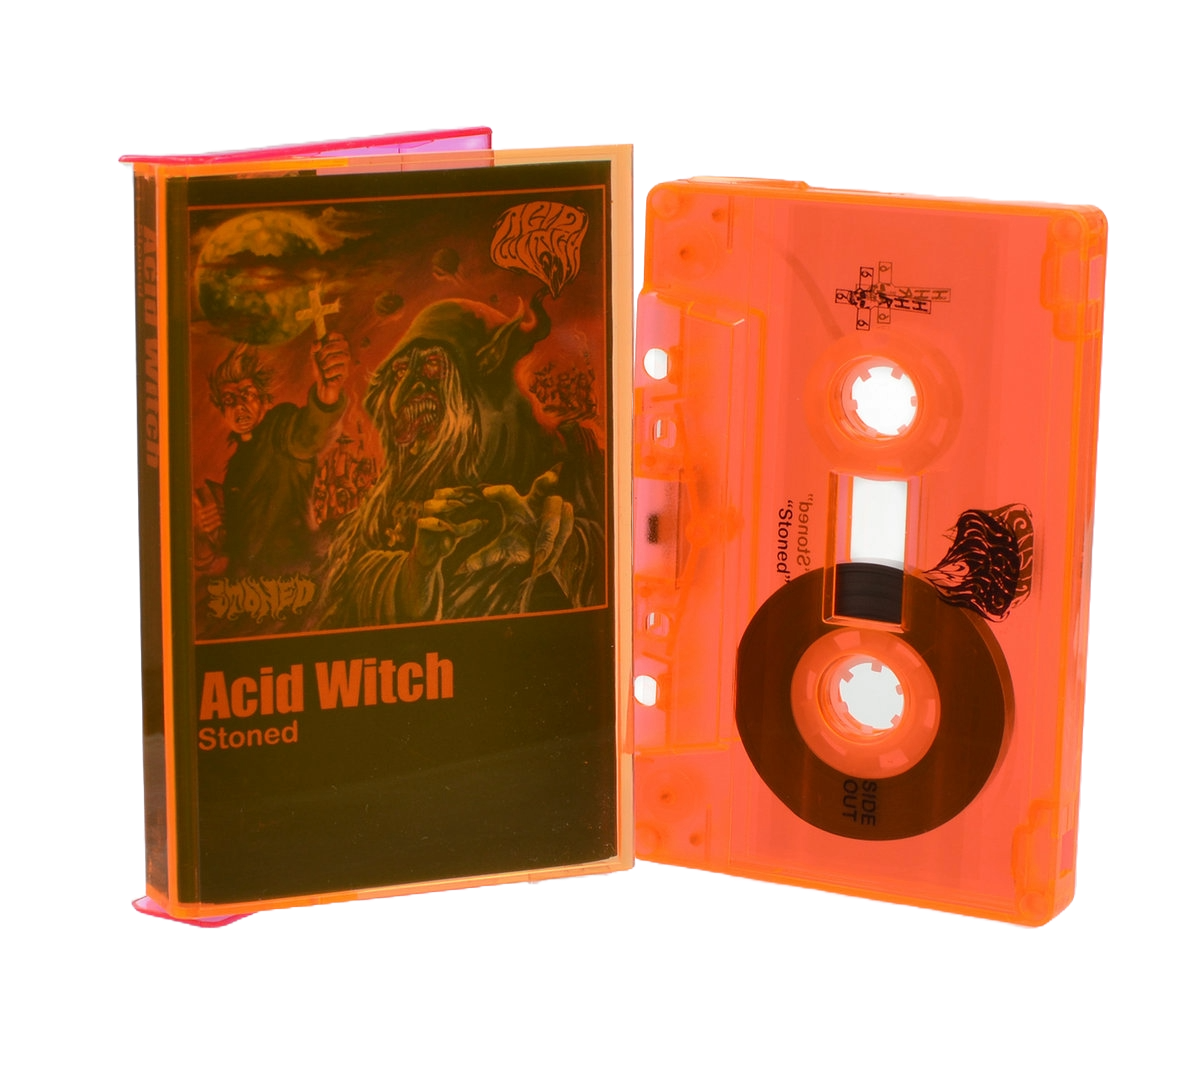 ACID WITCH – Stoned Cassette